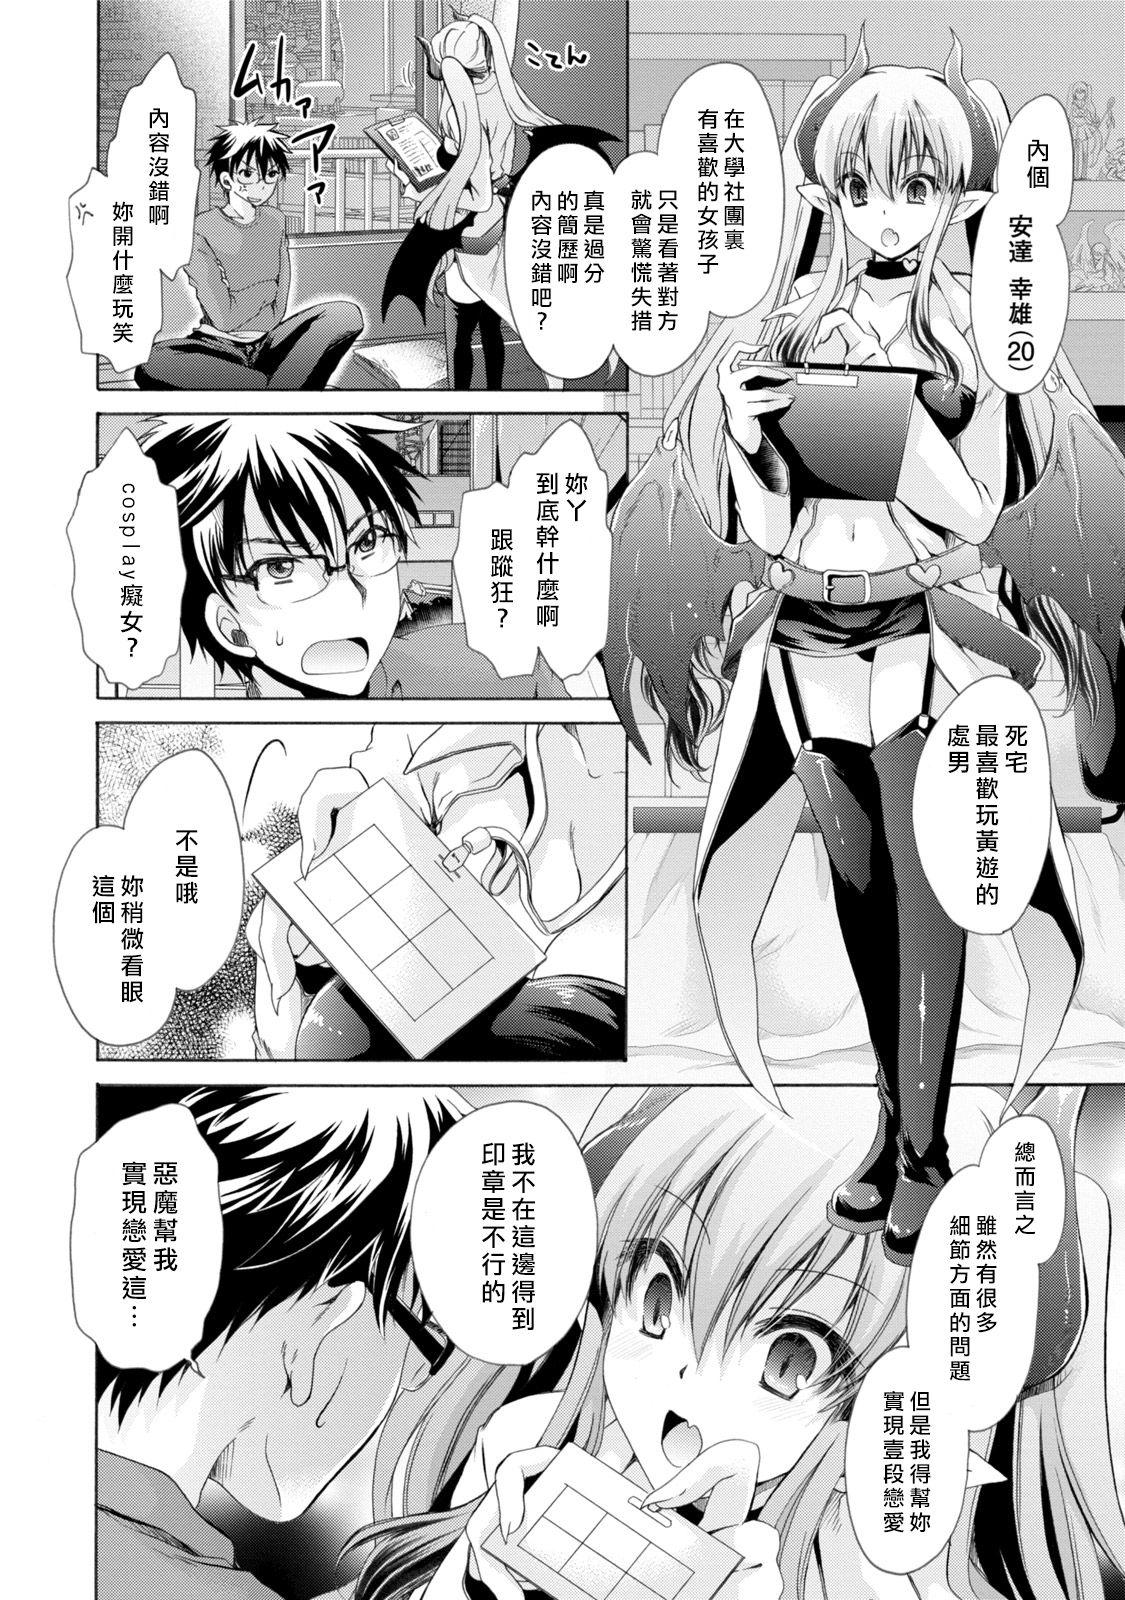 Blow Job Ore to Kanojo to Owaru Sekai - World's end LoveStory 1 Clothed Sex - Page 10